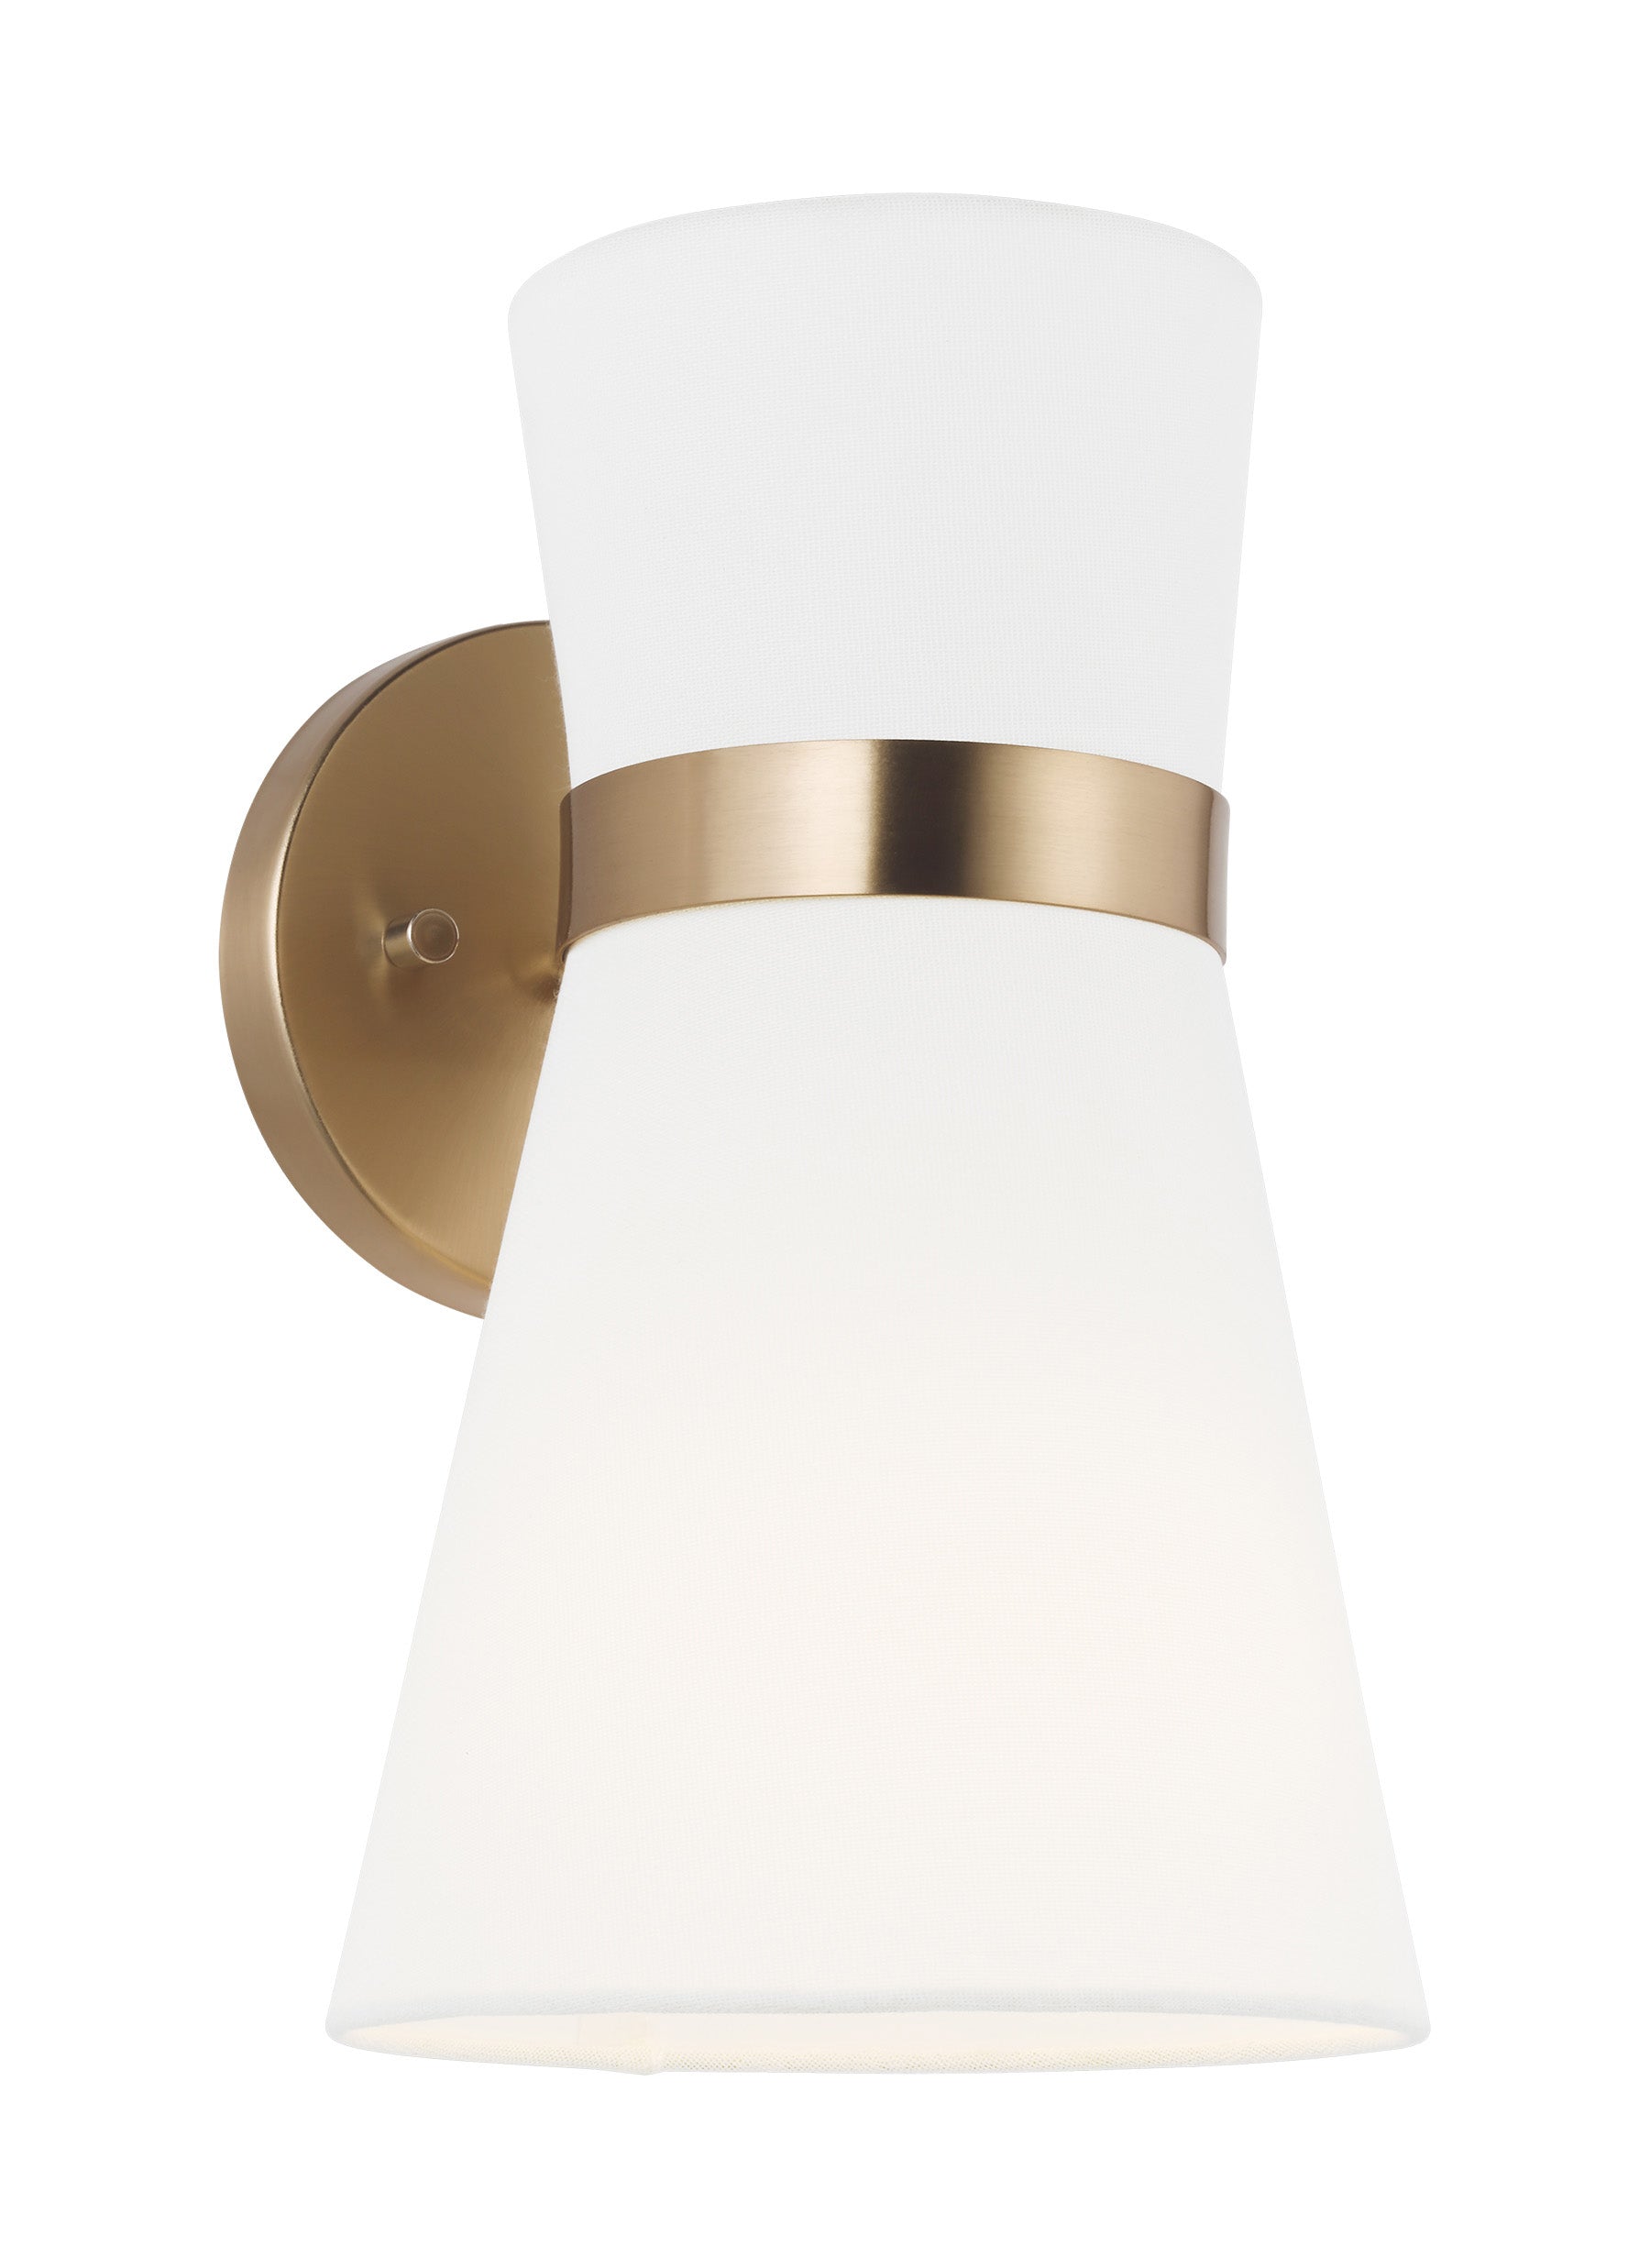 Clark 1L wall sconce - 4190501-848